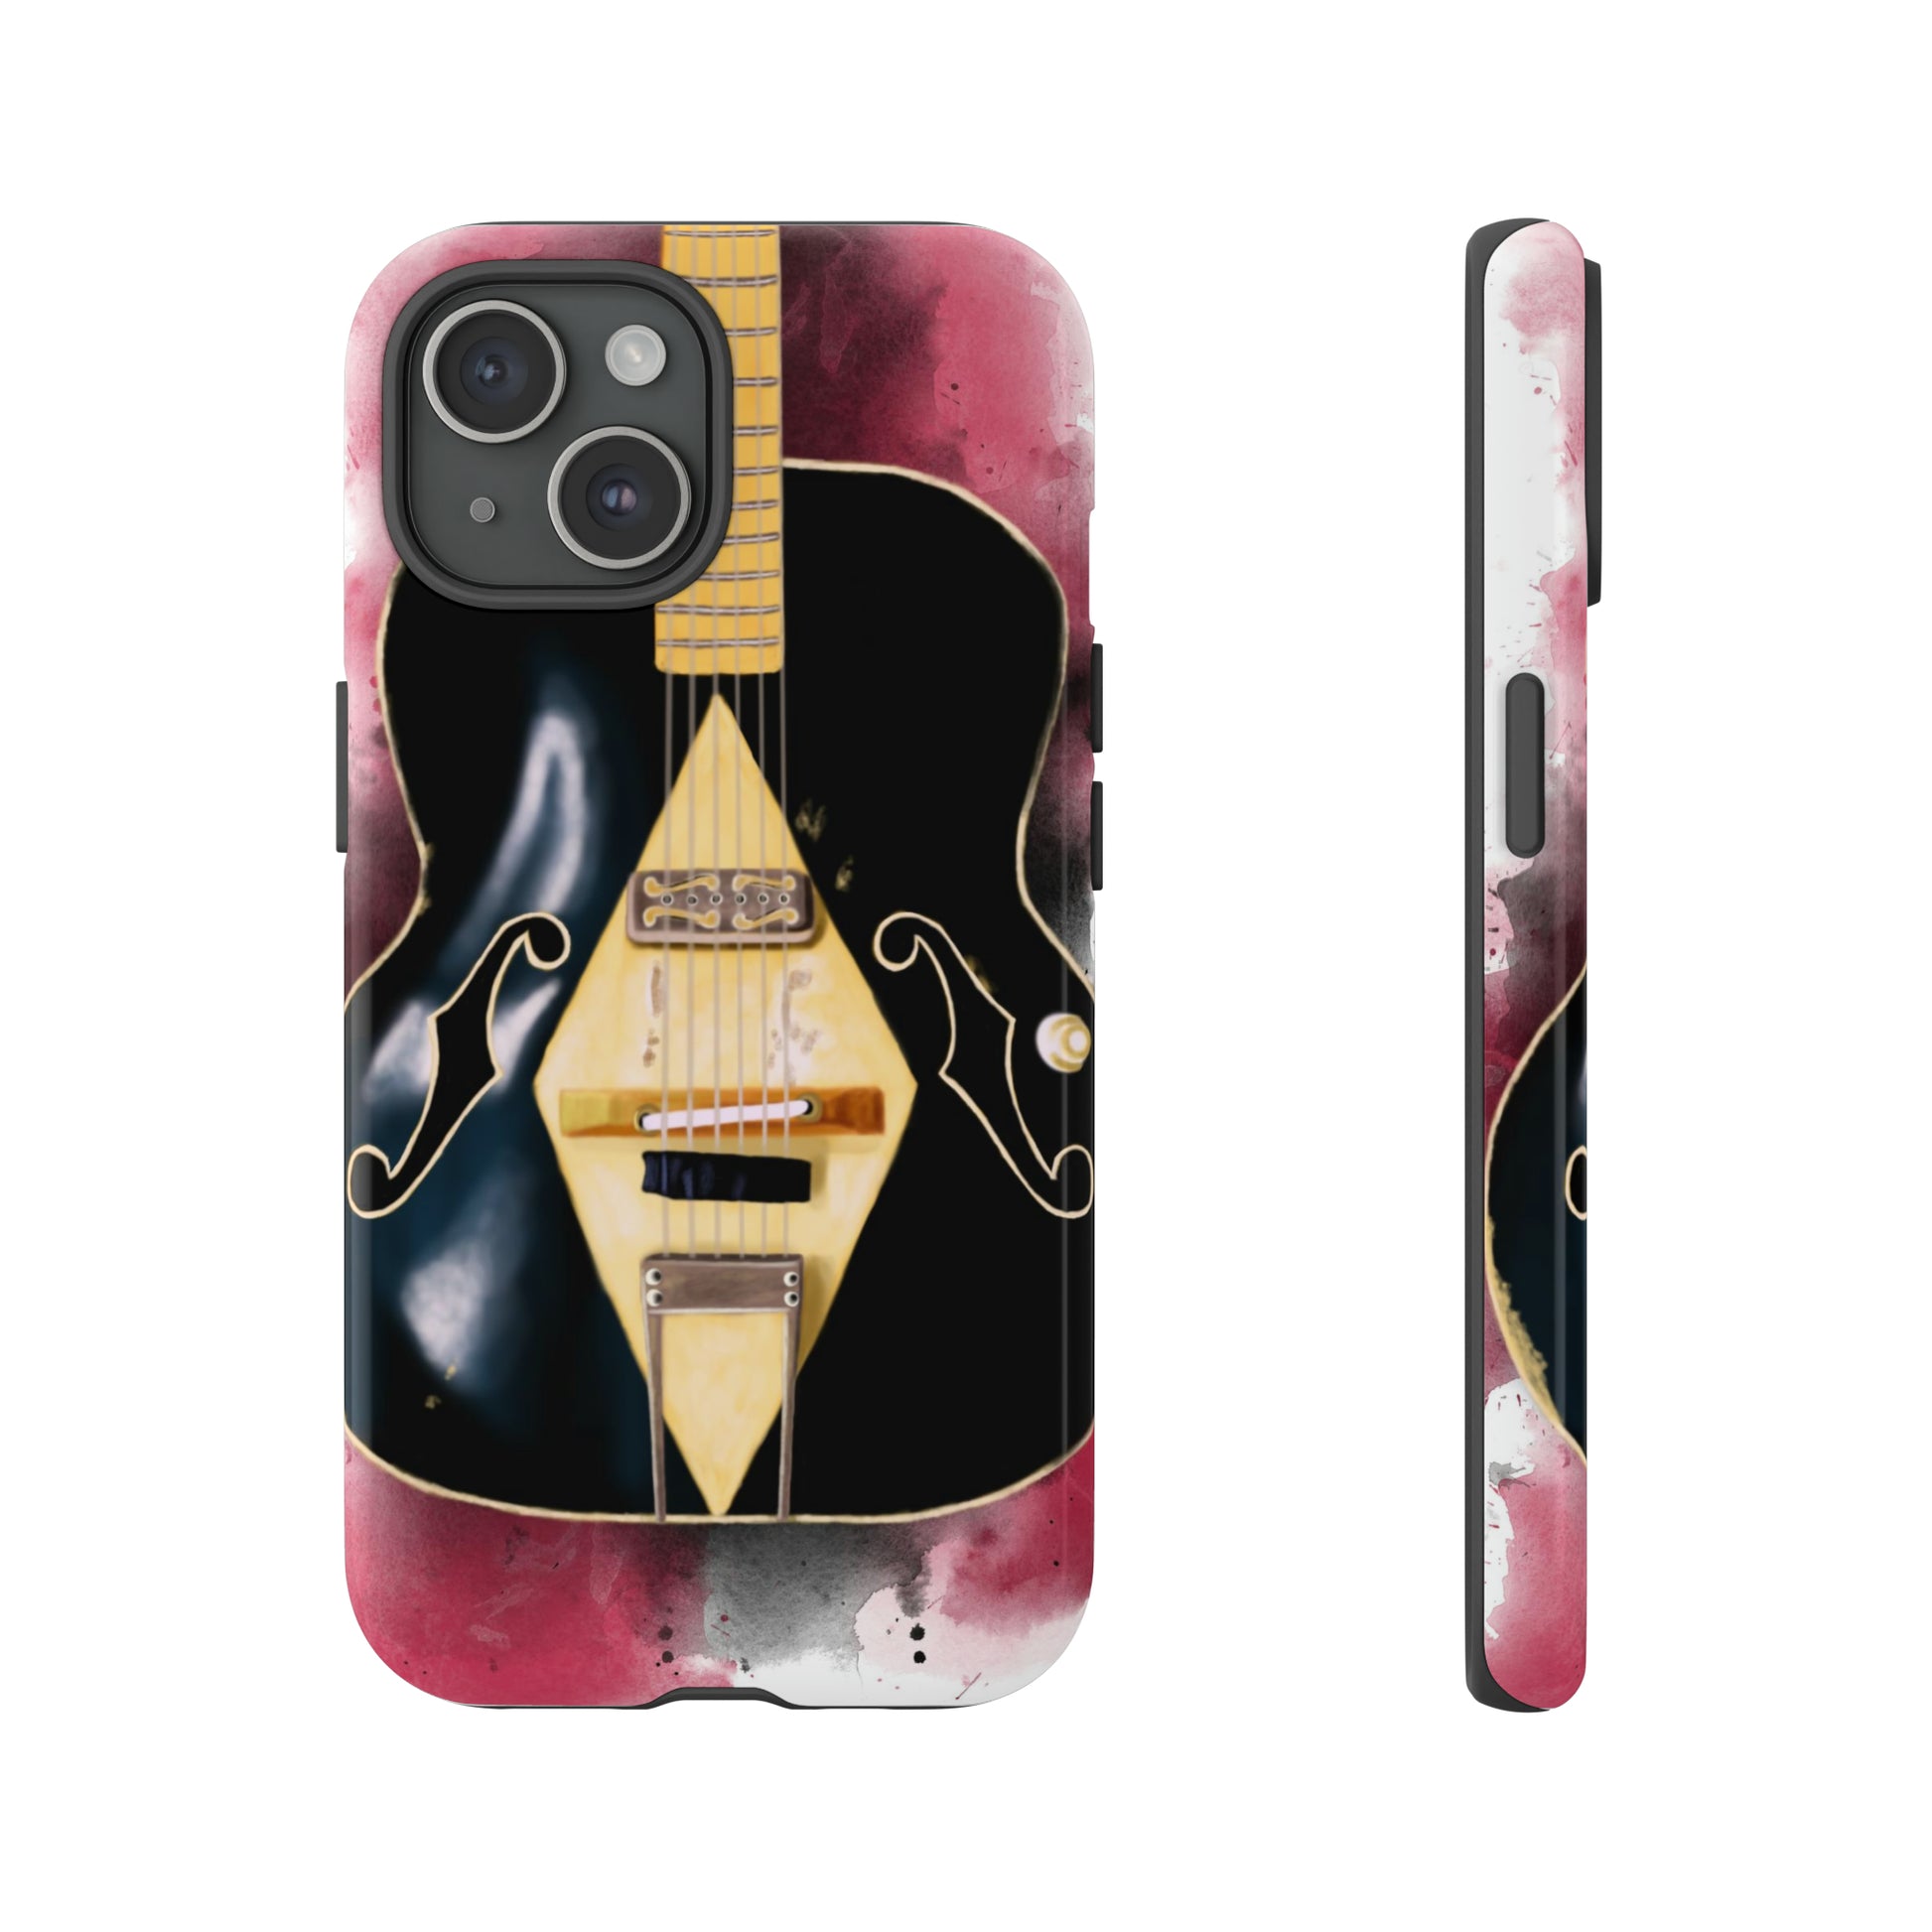 digital painting of a black-vintage white electric guitar printed on iphone tough phone case